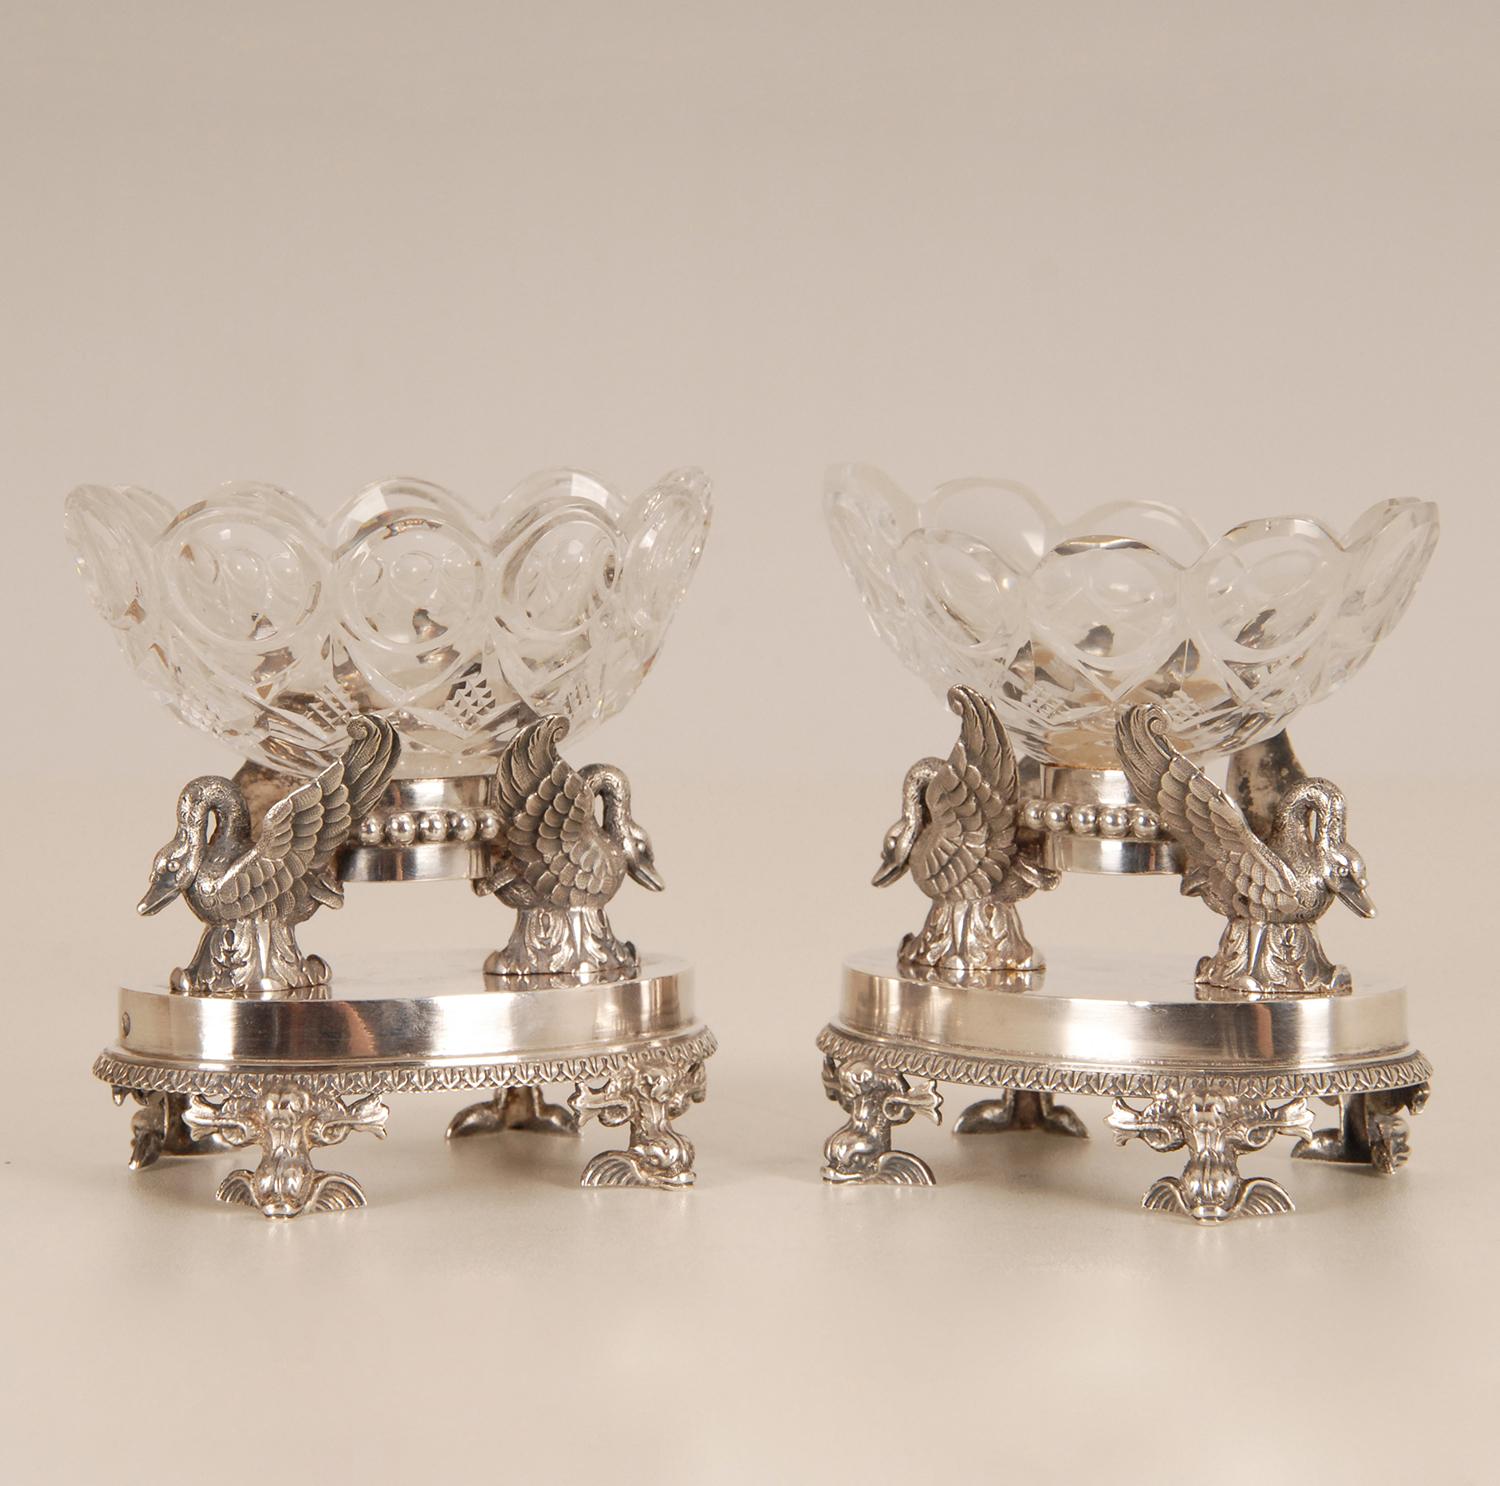 18th Century Museal French masterpieces.
A pair sterling silver and Baccarat crystal salt cellars.
The 2 oval crystal bowls carried by 2 Swans on
an oval base supported by 4 Dolphins
Hallmarkes French sterling Silver 950, Paris, Marks for the